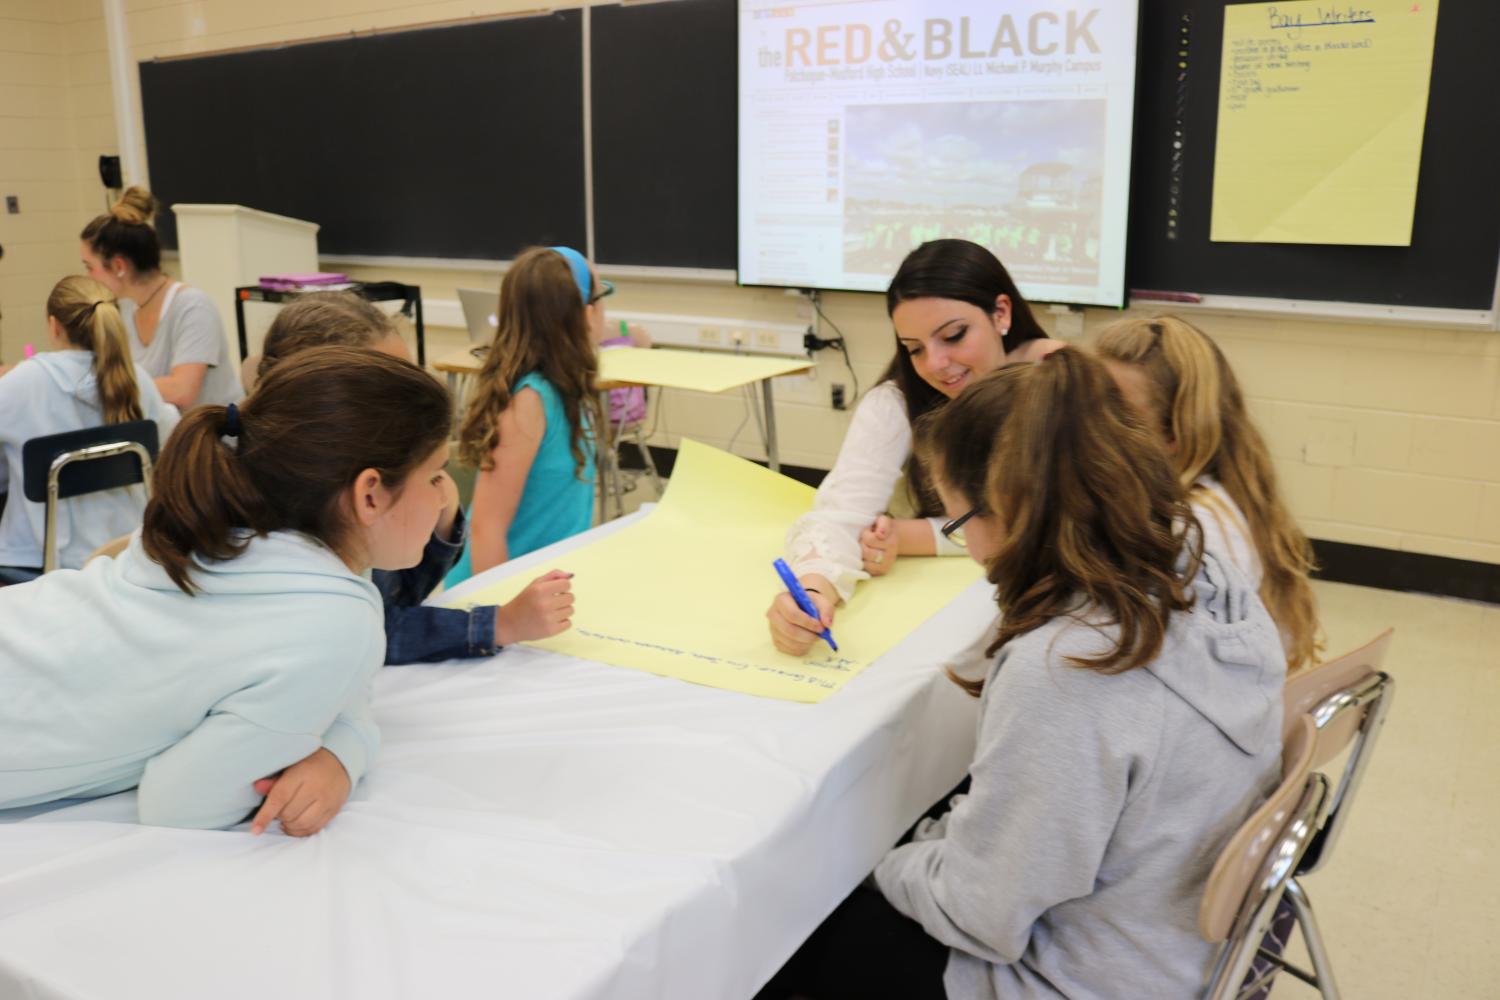 4th and 5th graders from Bay Elementary join seniors from the Red & Black for a writing workshop.